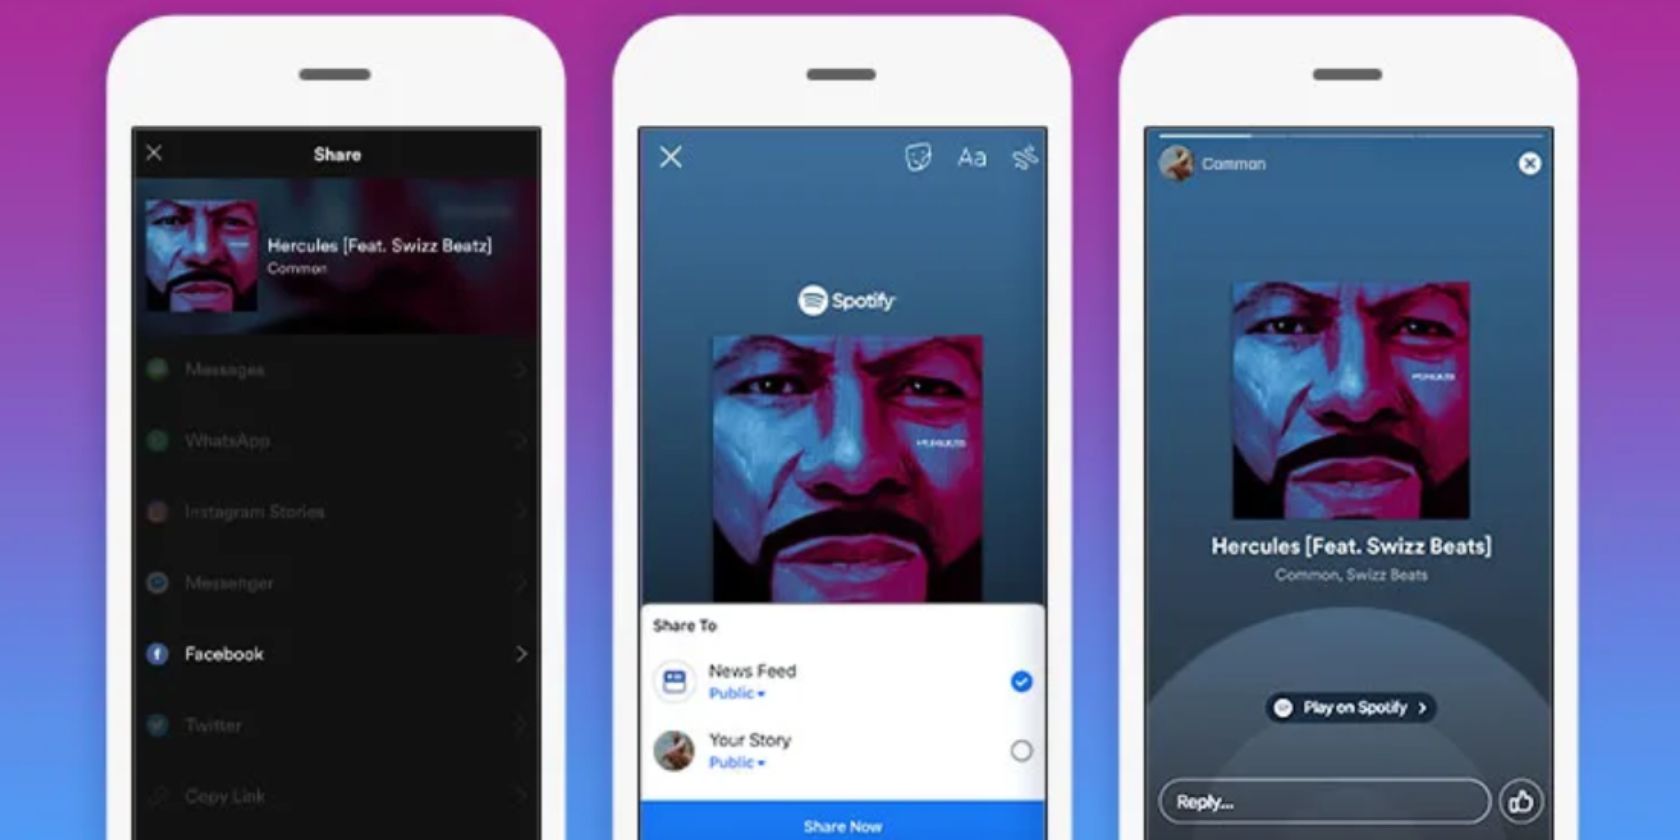 How to Share Spotify Songs to Facebook Stories